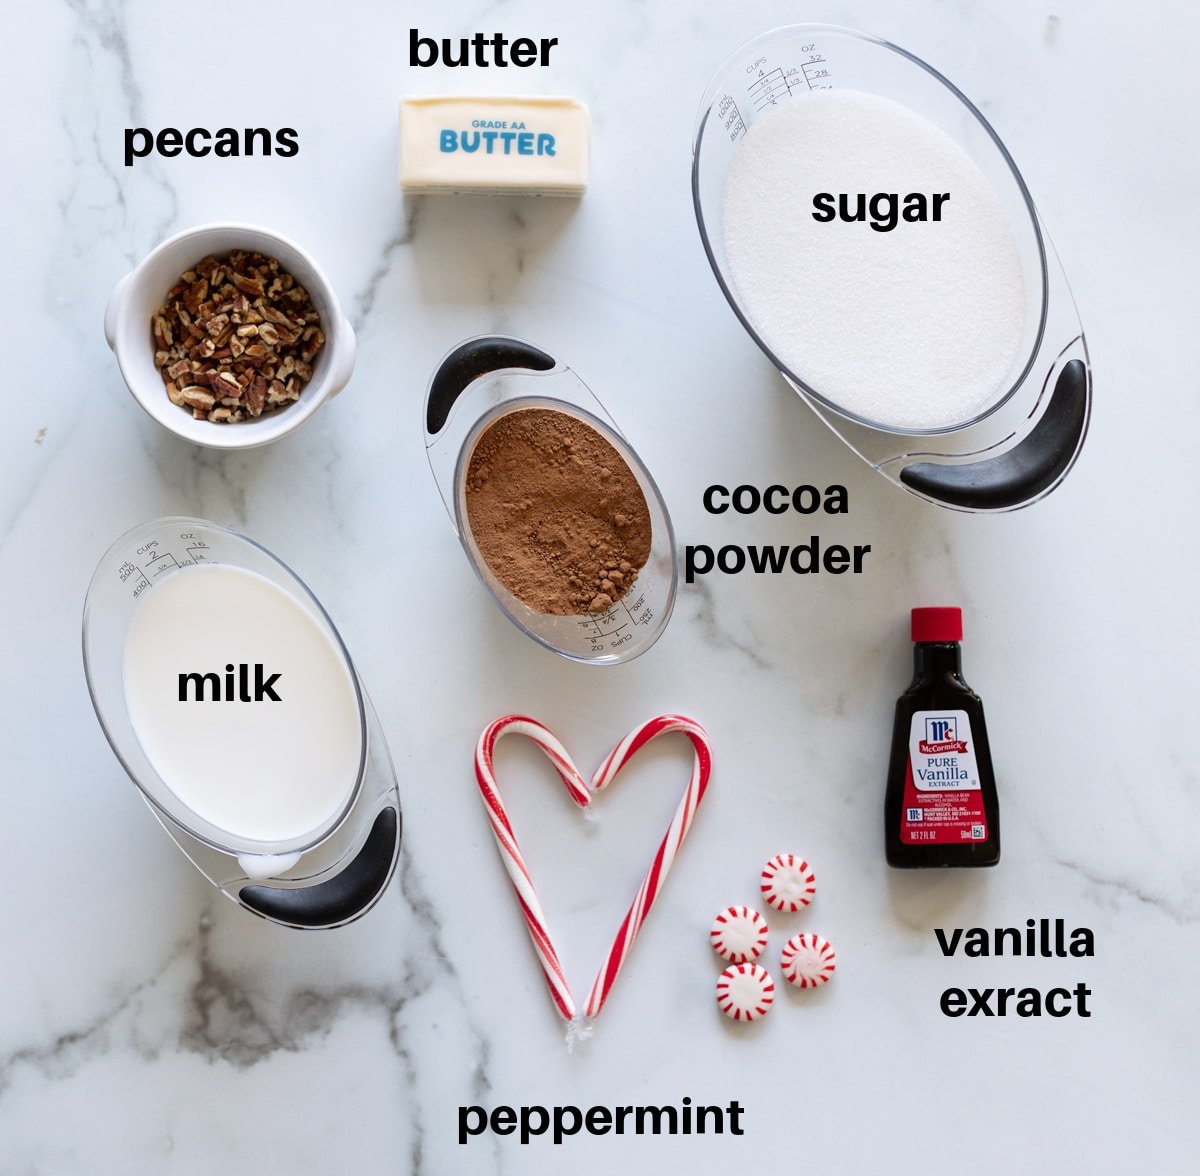 milk, sugar, cocoa powder, vanilla extract, nuts, and peppermint on a counter.